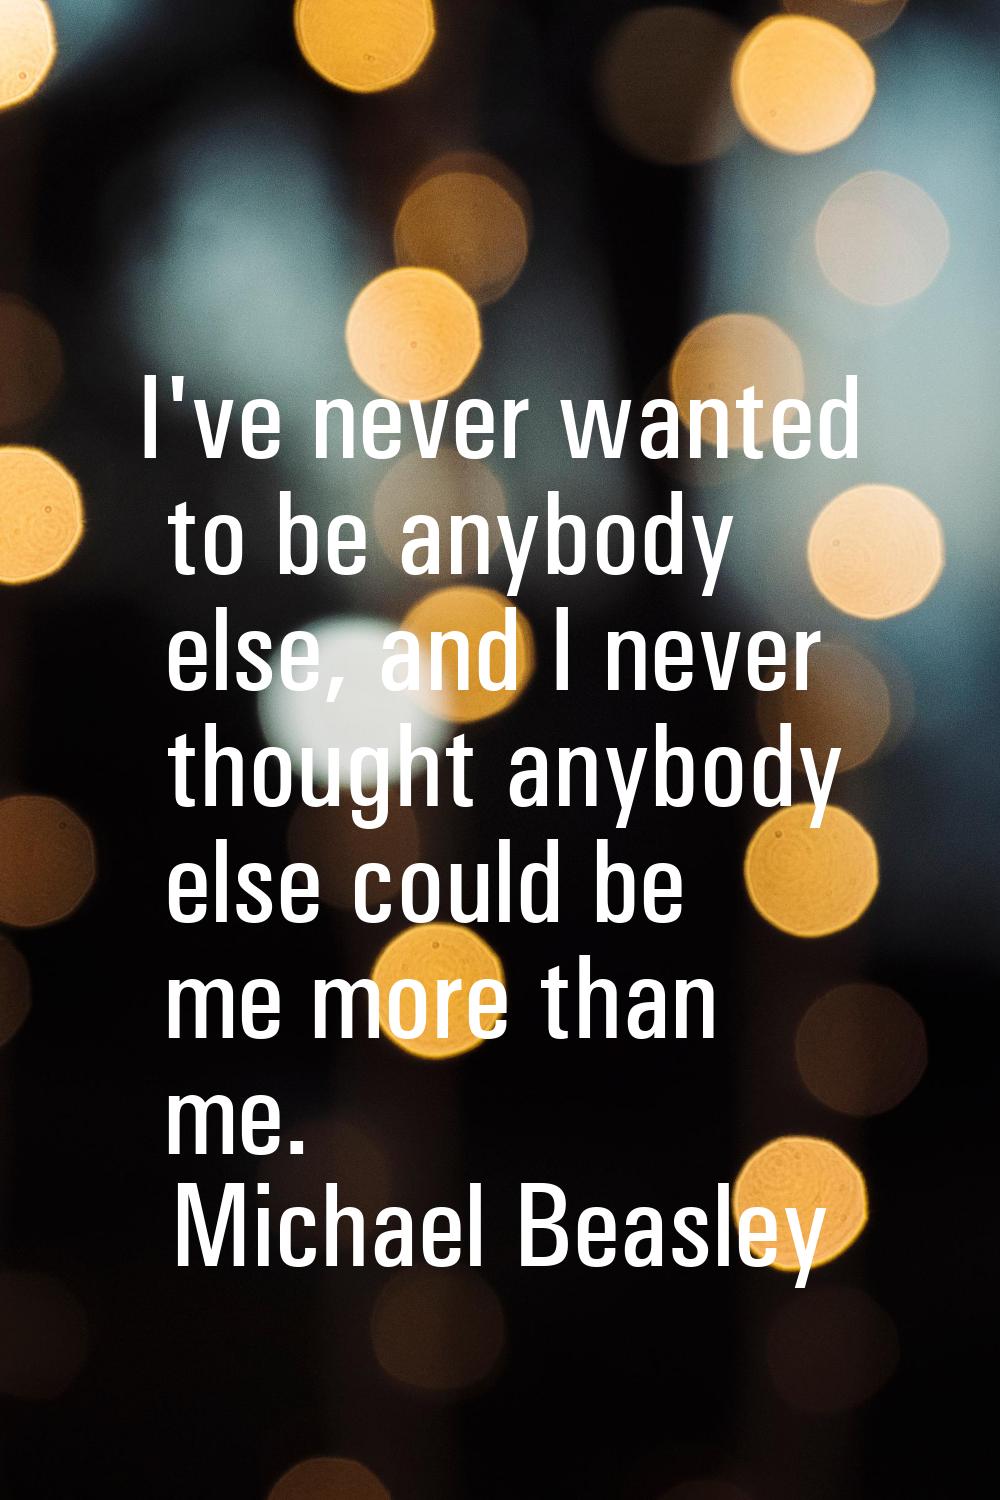 I've never wanted to be anybody else, and I never thought anybody else could be me more than me.